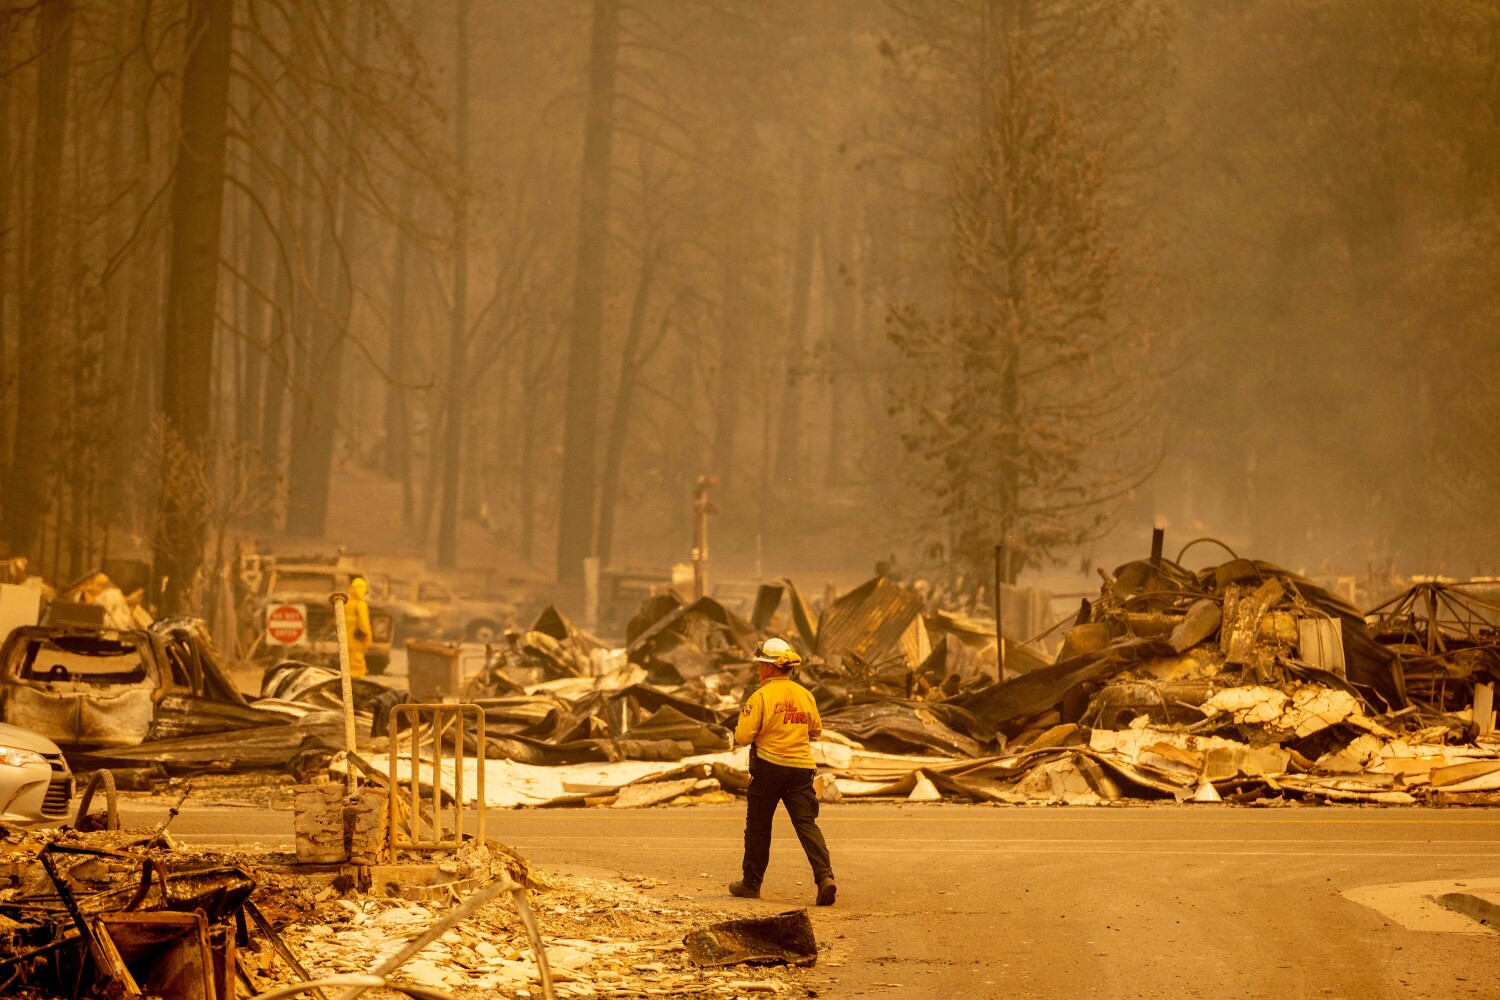 Massive fire wipes out much of California town, leaving broken hearts, broken dreams